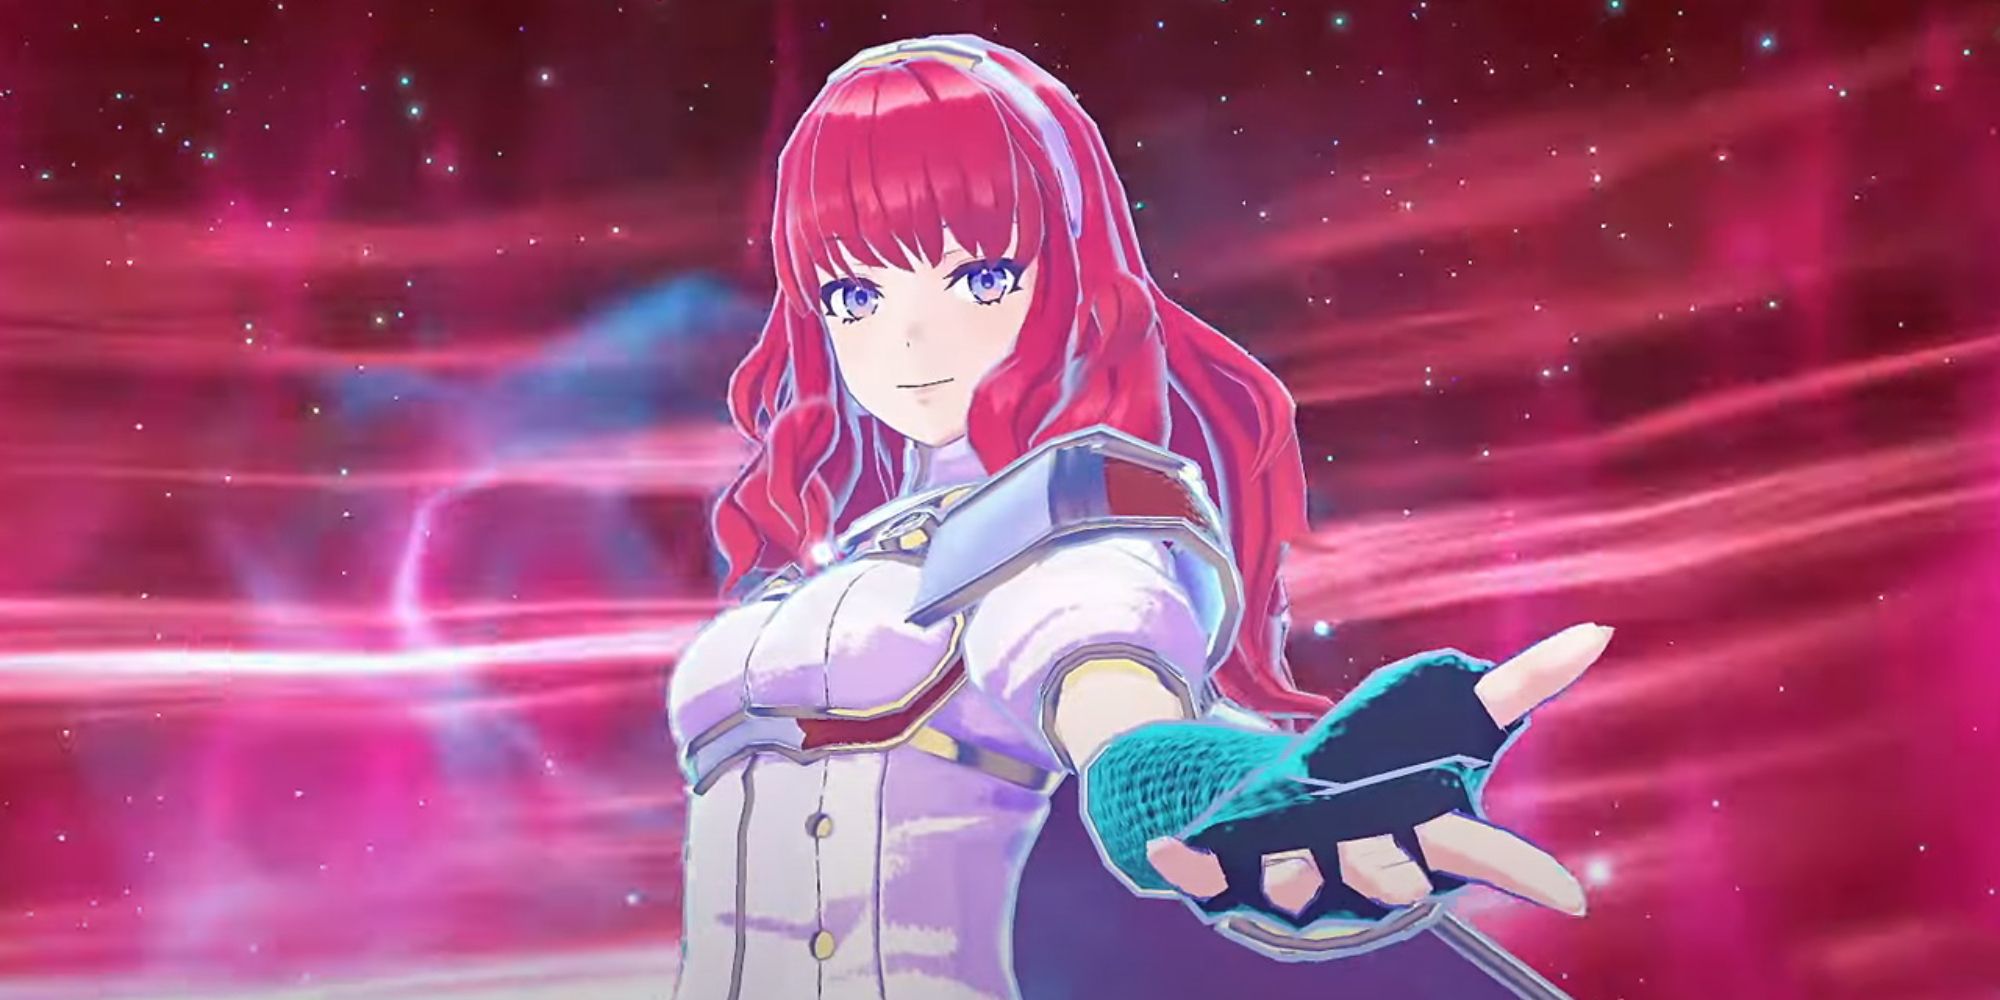 Celica holding out her hand in Fire Emblem Engage